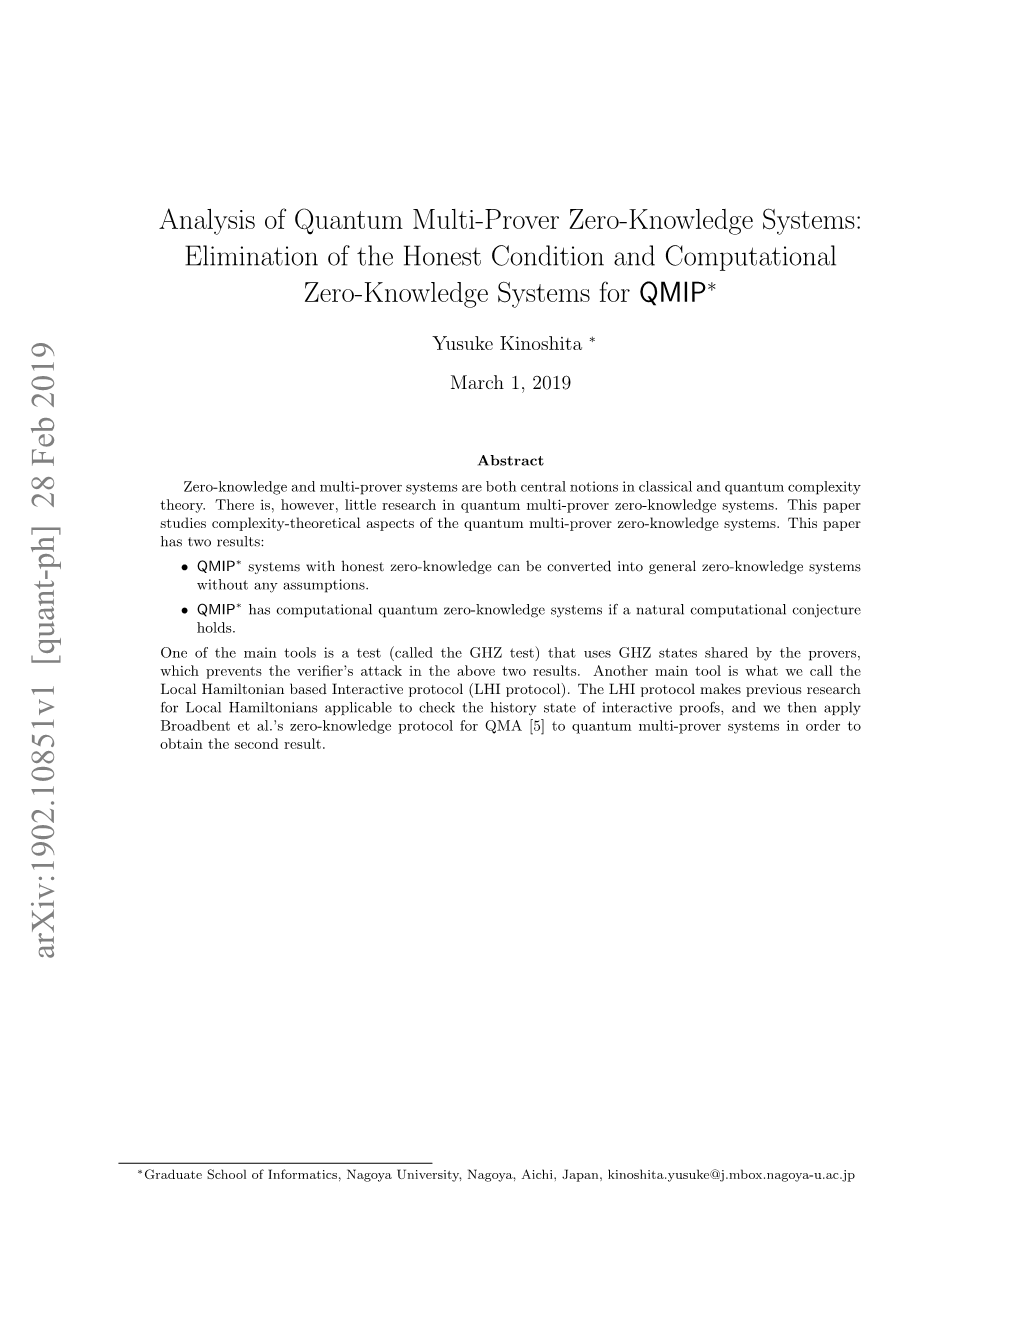 Analysis of Quantum Multi-Prover Zero-Knowledge Systems: Elimination of the Honest Condition and Computational Zero-Knowledge Systems for QMIP∗